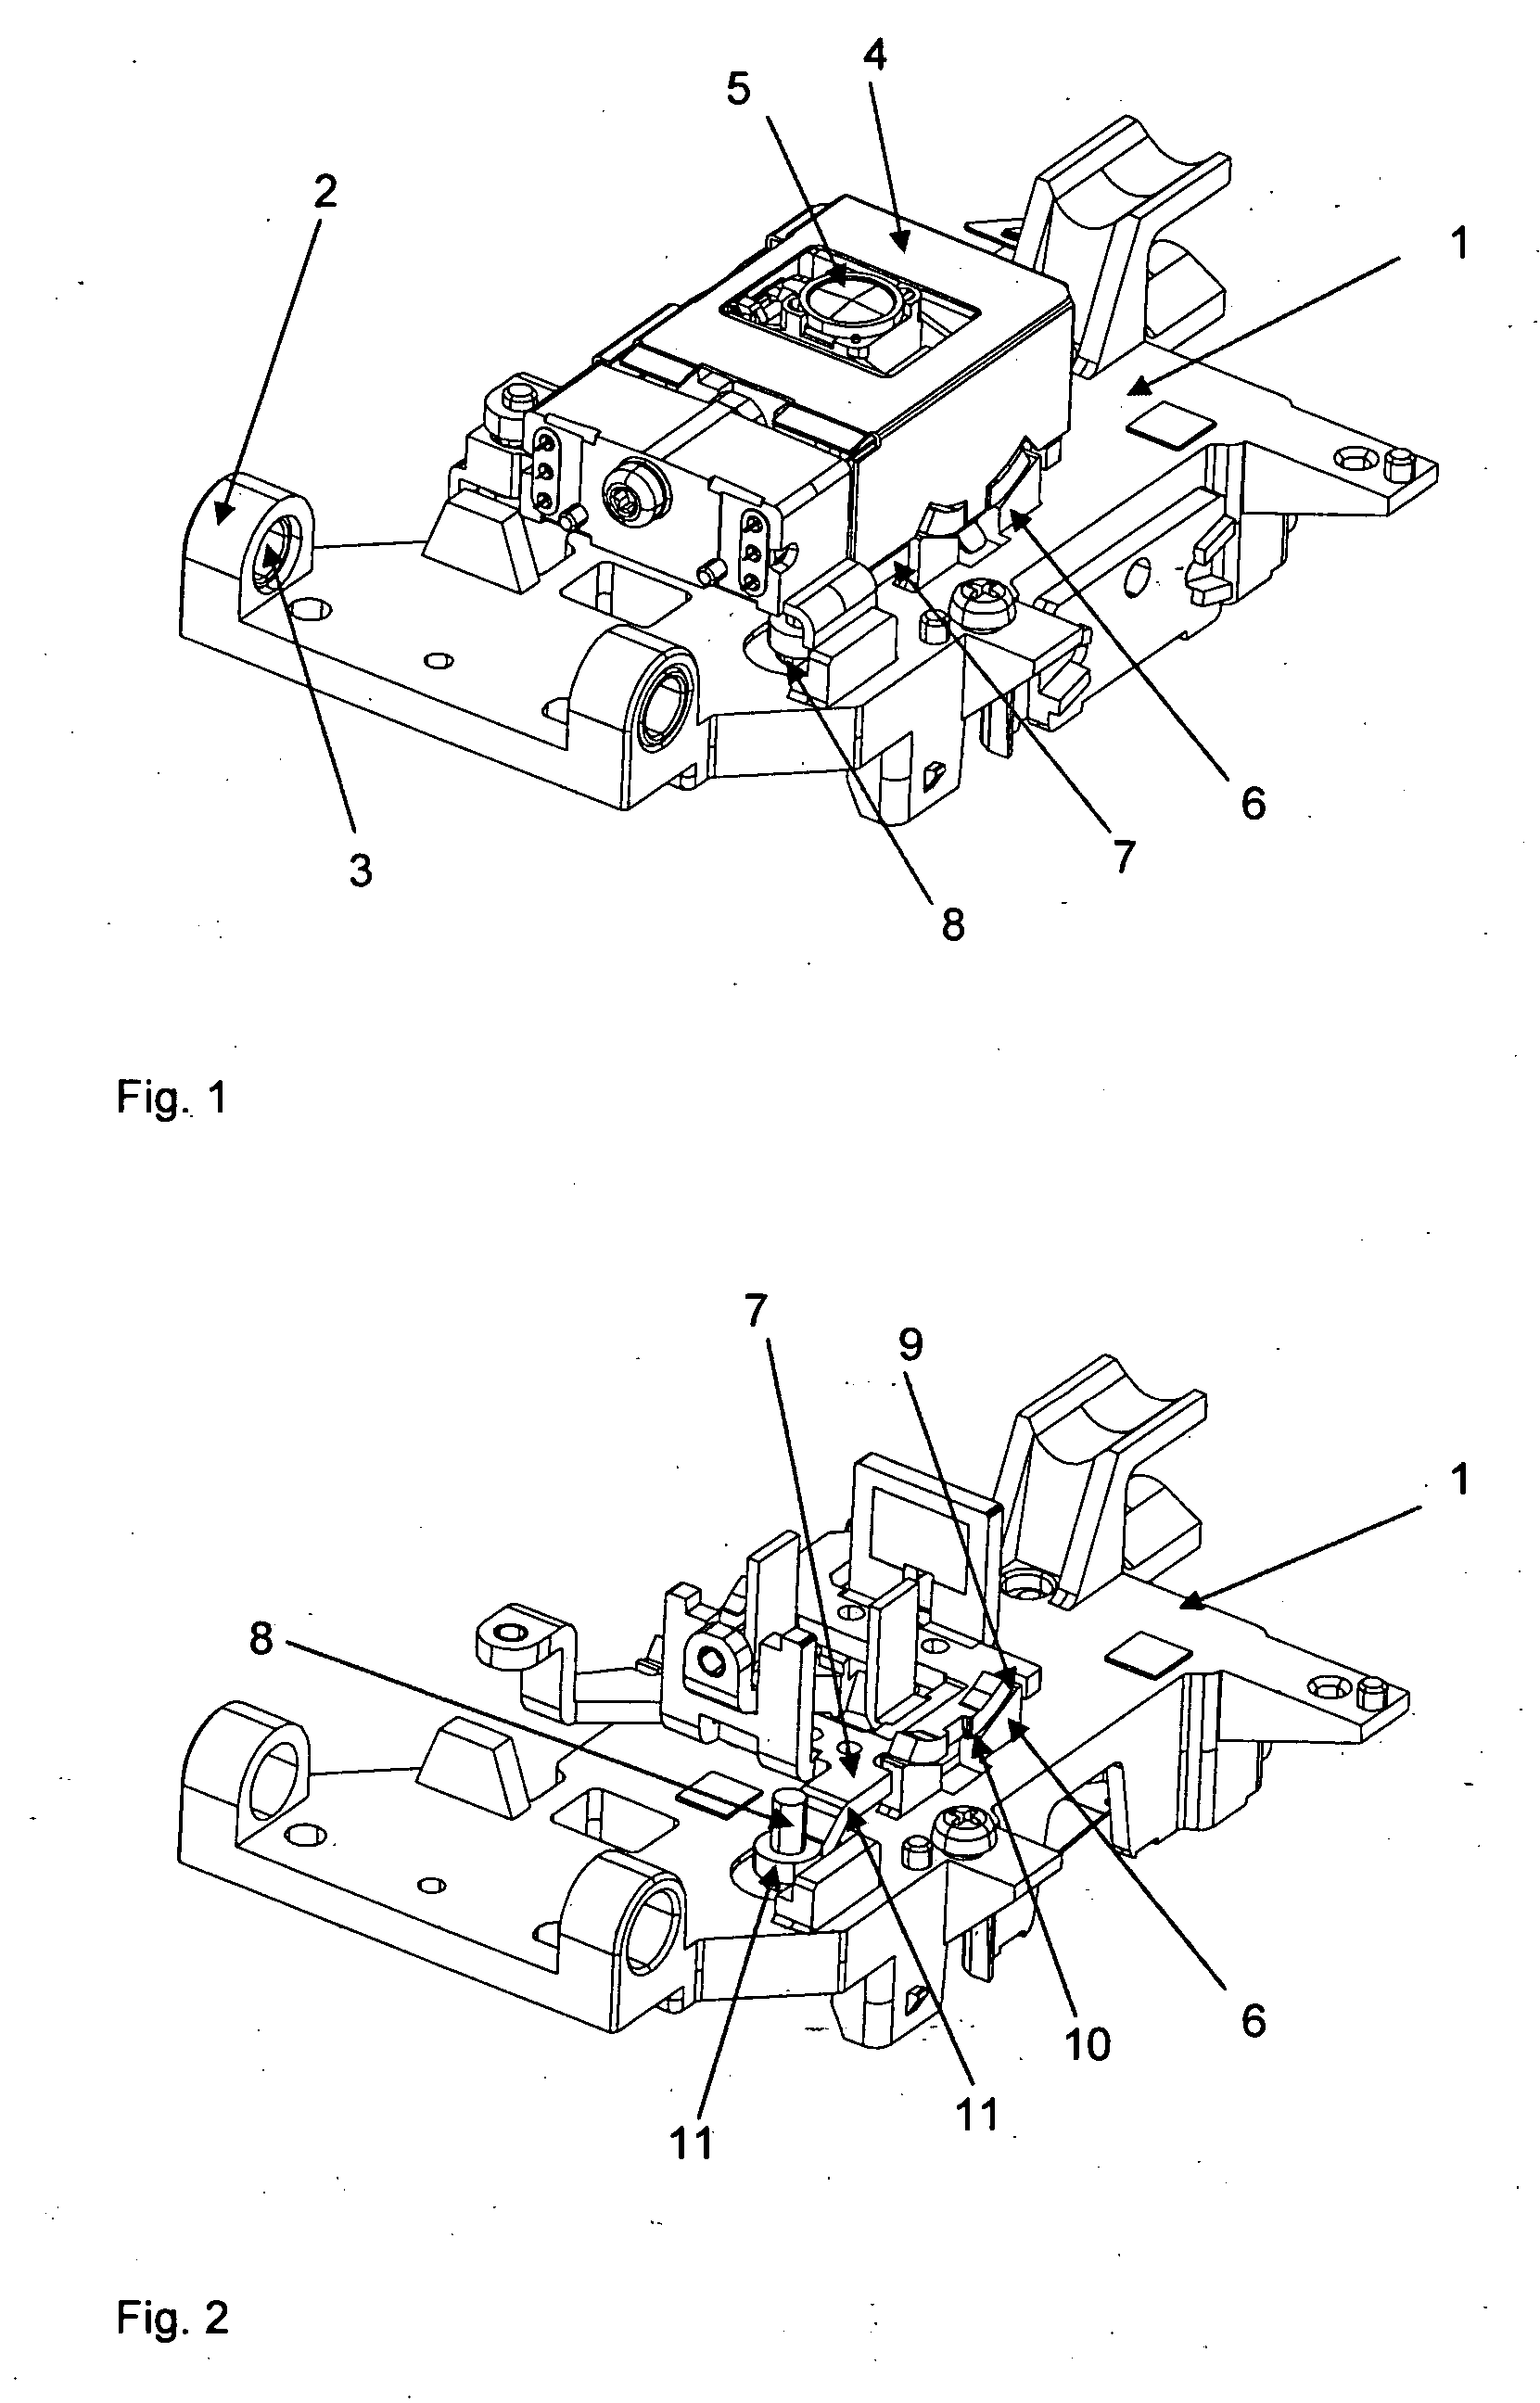 Optical scanning device for an appliance for reading and/or writing to optical recording media